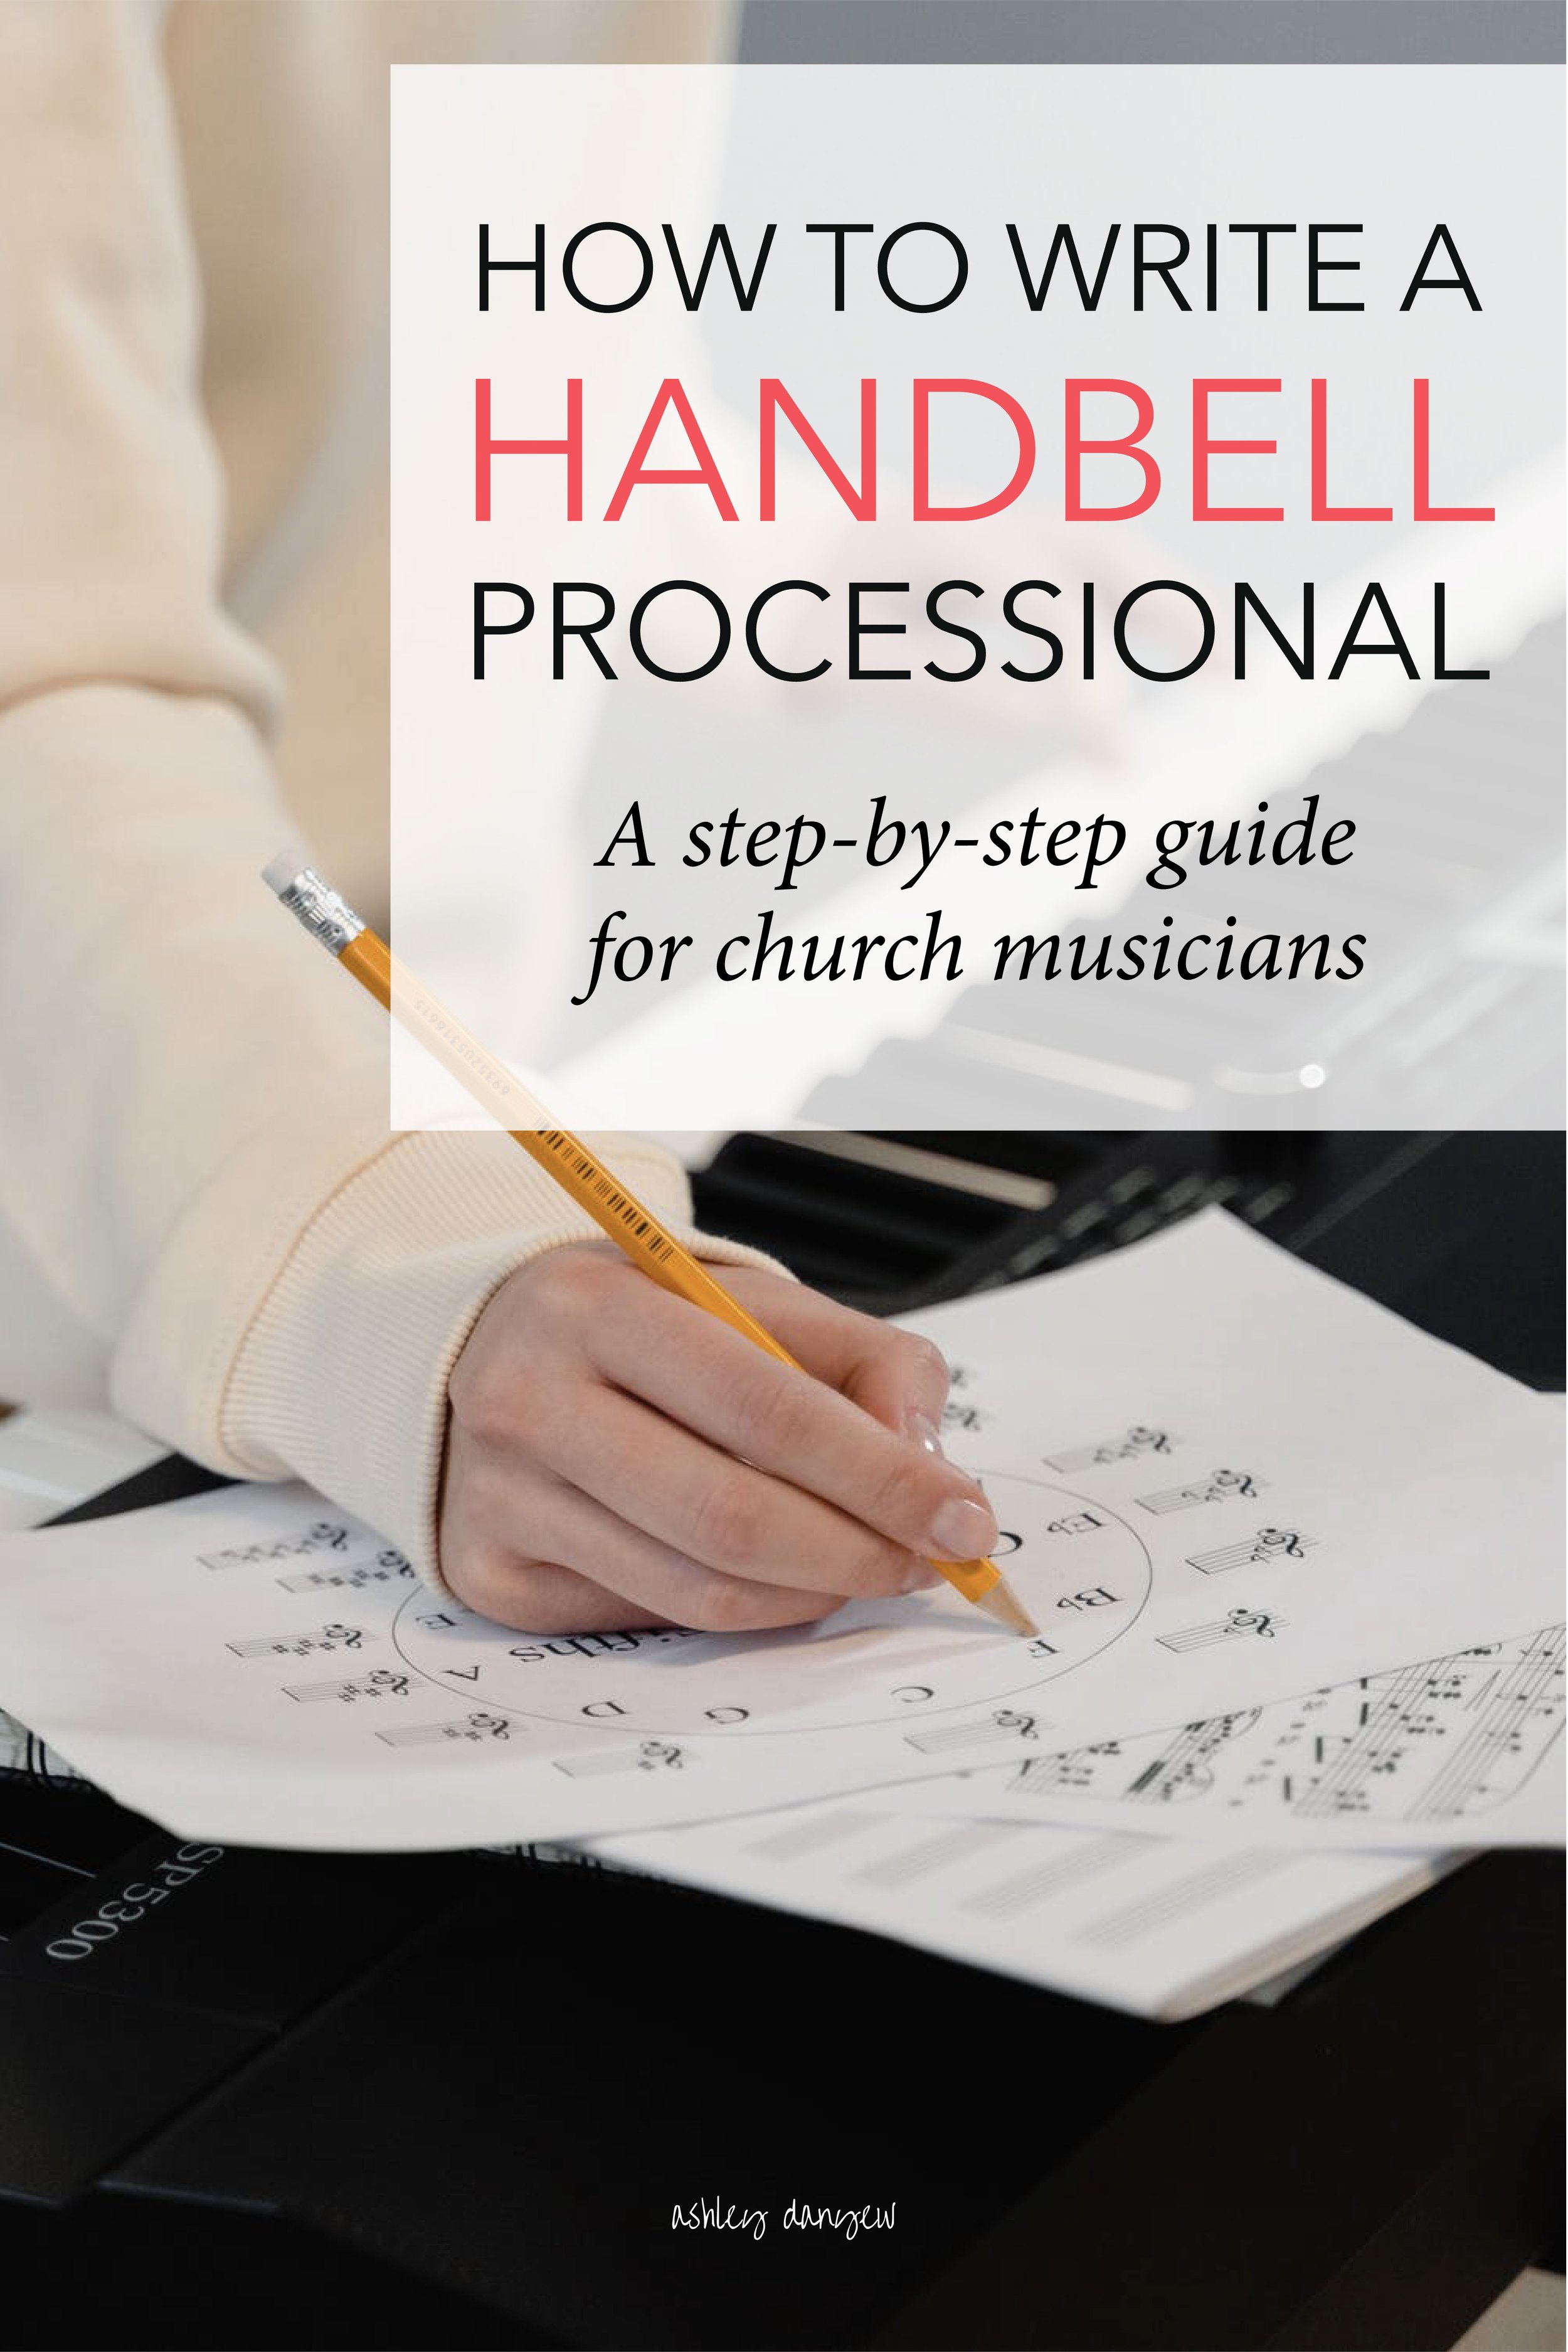 How to Write a Handbell Processional